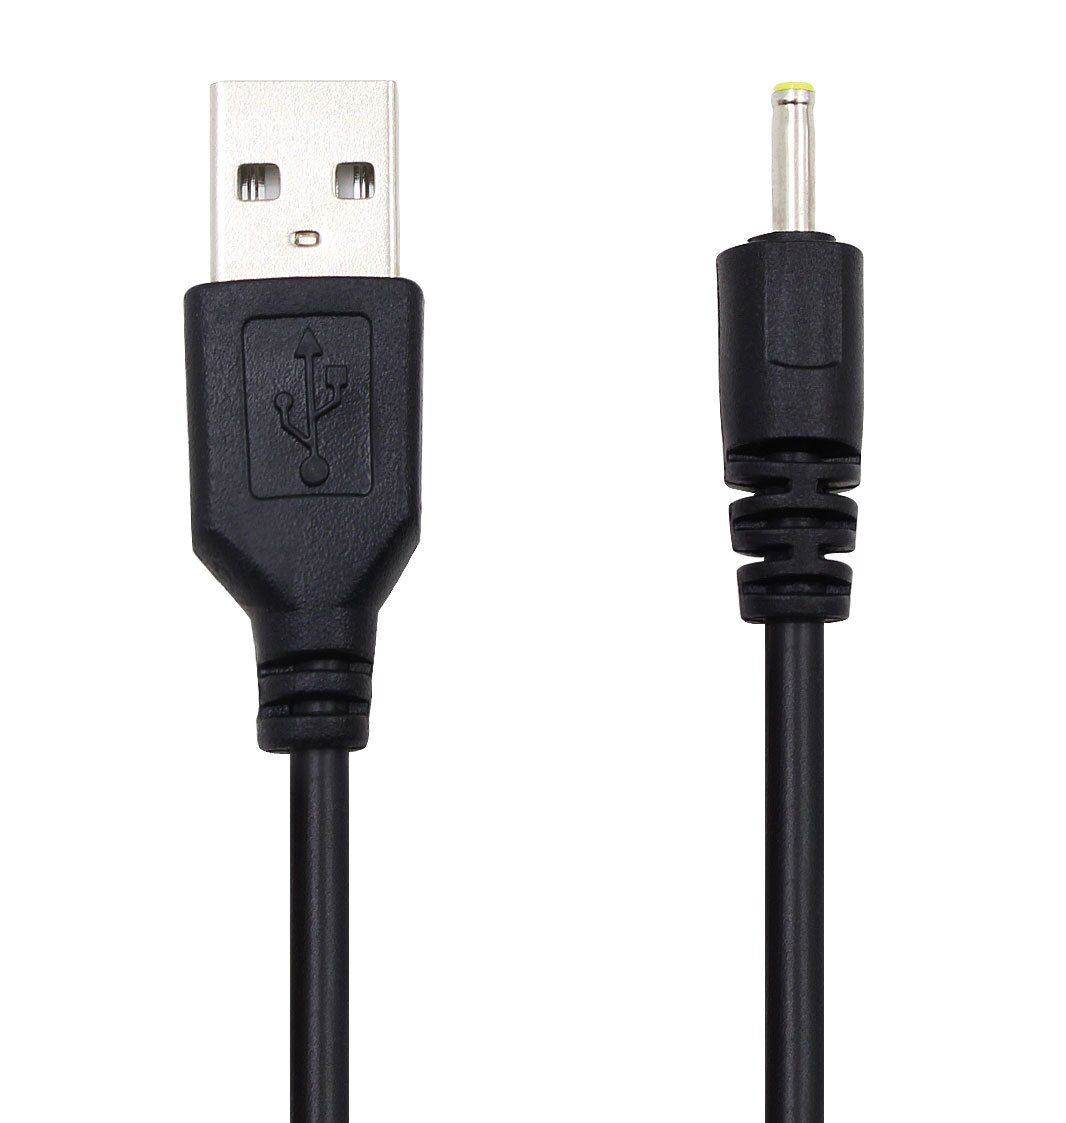 USB Cable Lead Cord Charger Power voor LG Optimus Pad v909 v900 Android Tablet